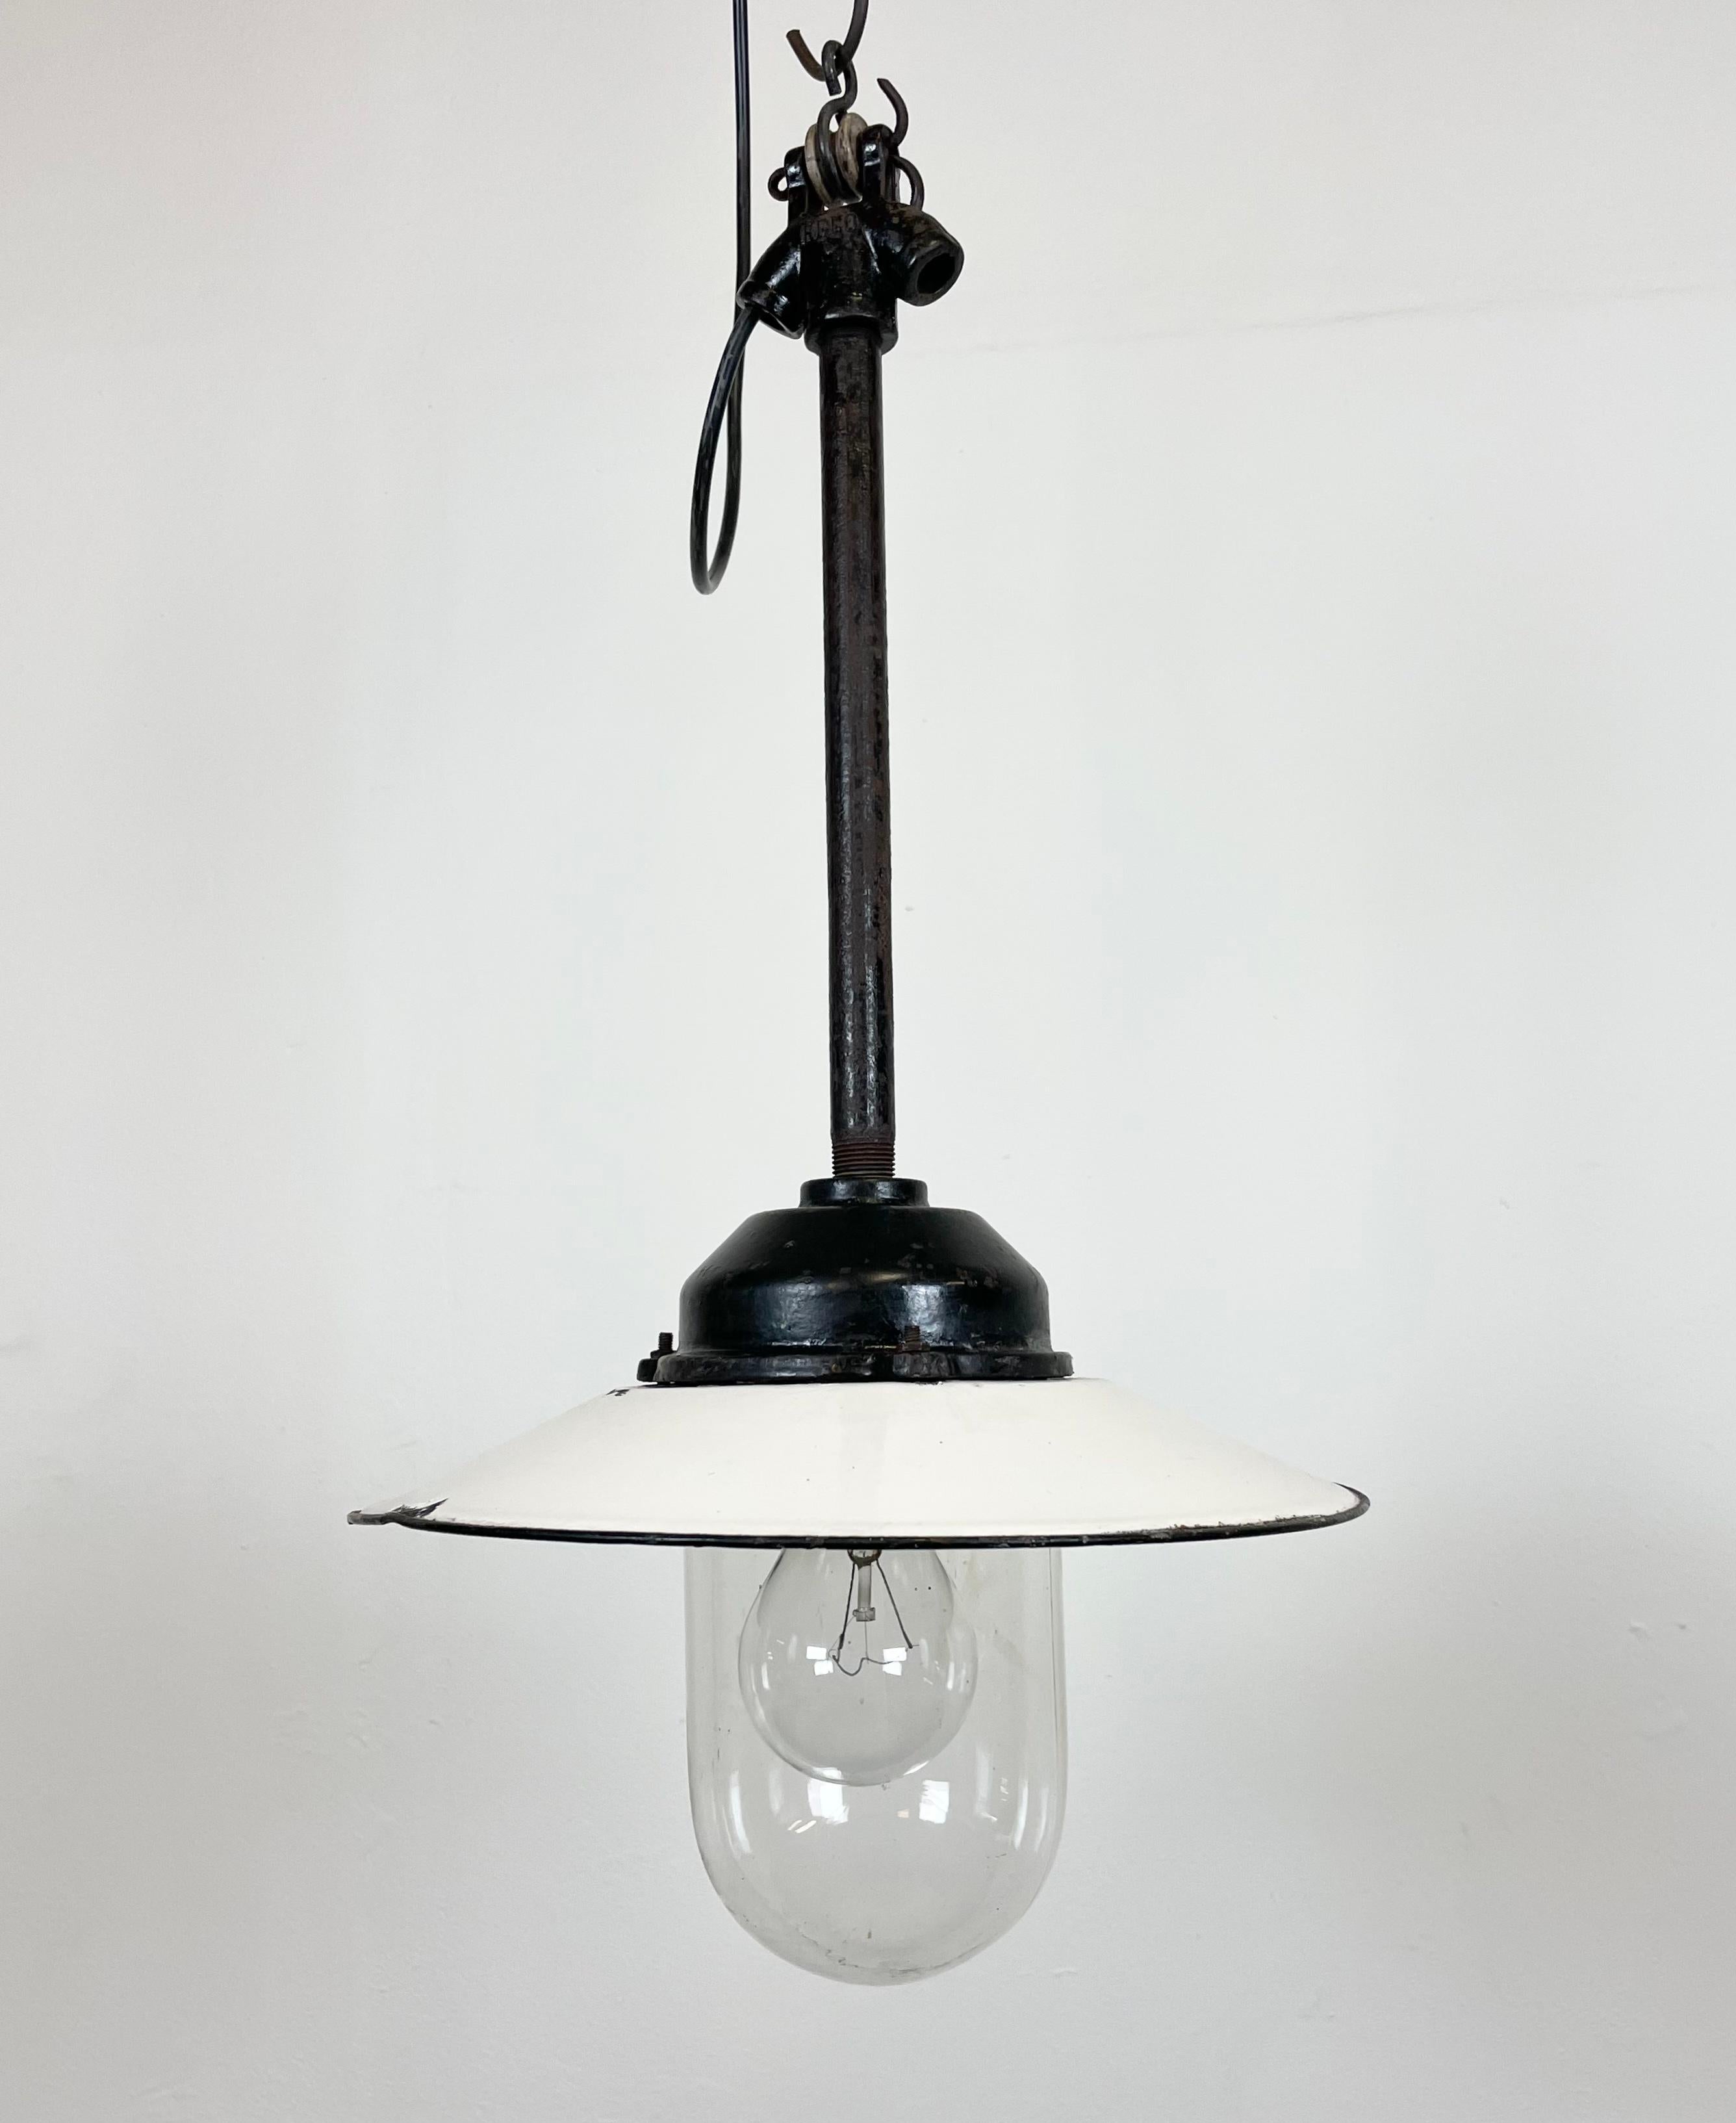 White Enamel and Cast Iron Industrial Pendant Light from Helo Leuchten, 1950s For Sale 4